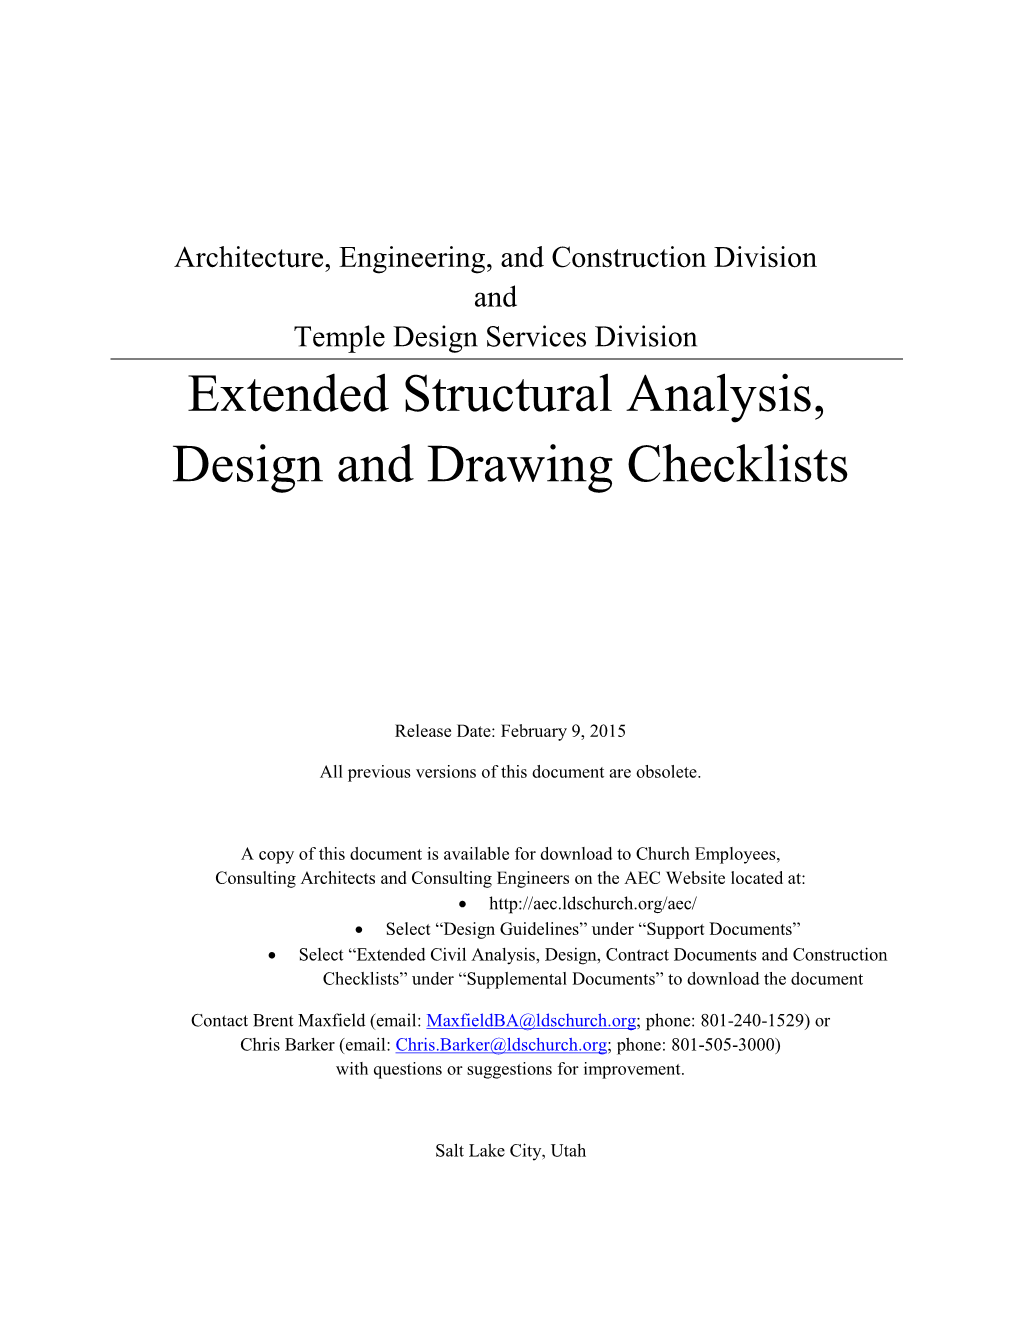 Extended Structural Analysis, Design and Drawing Checklists